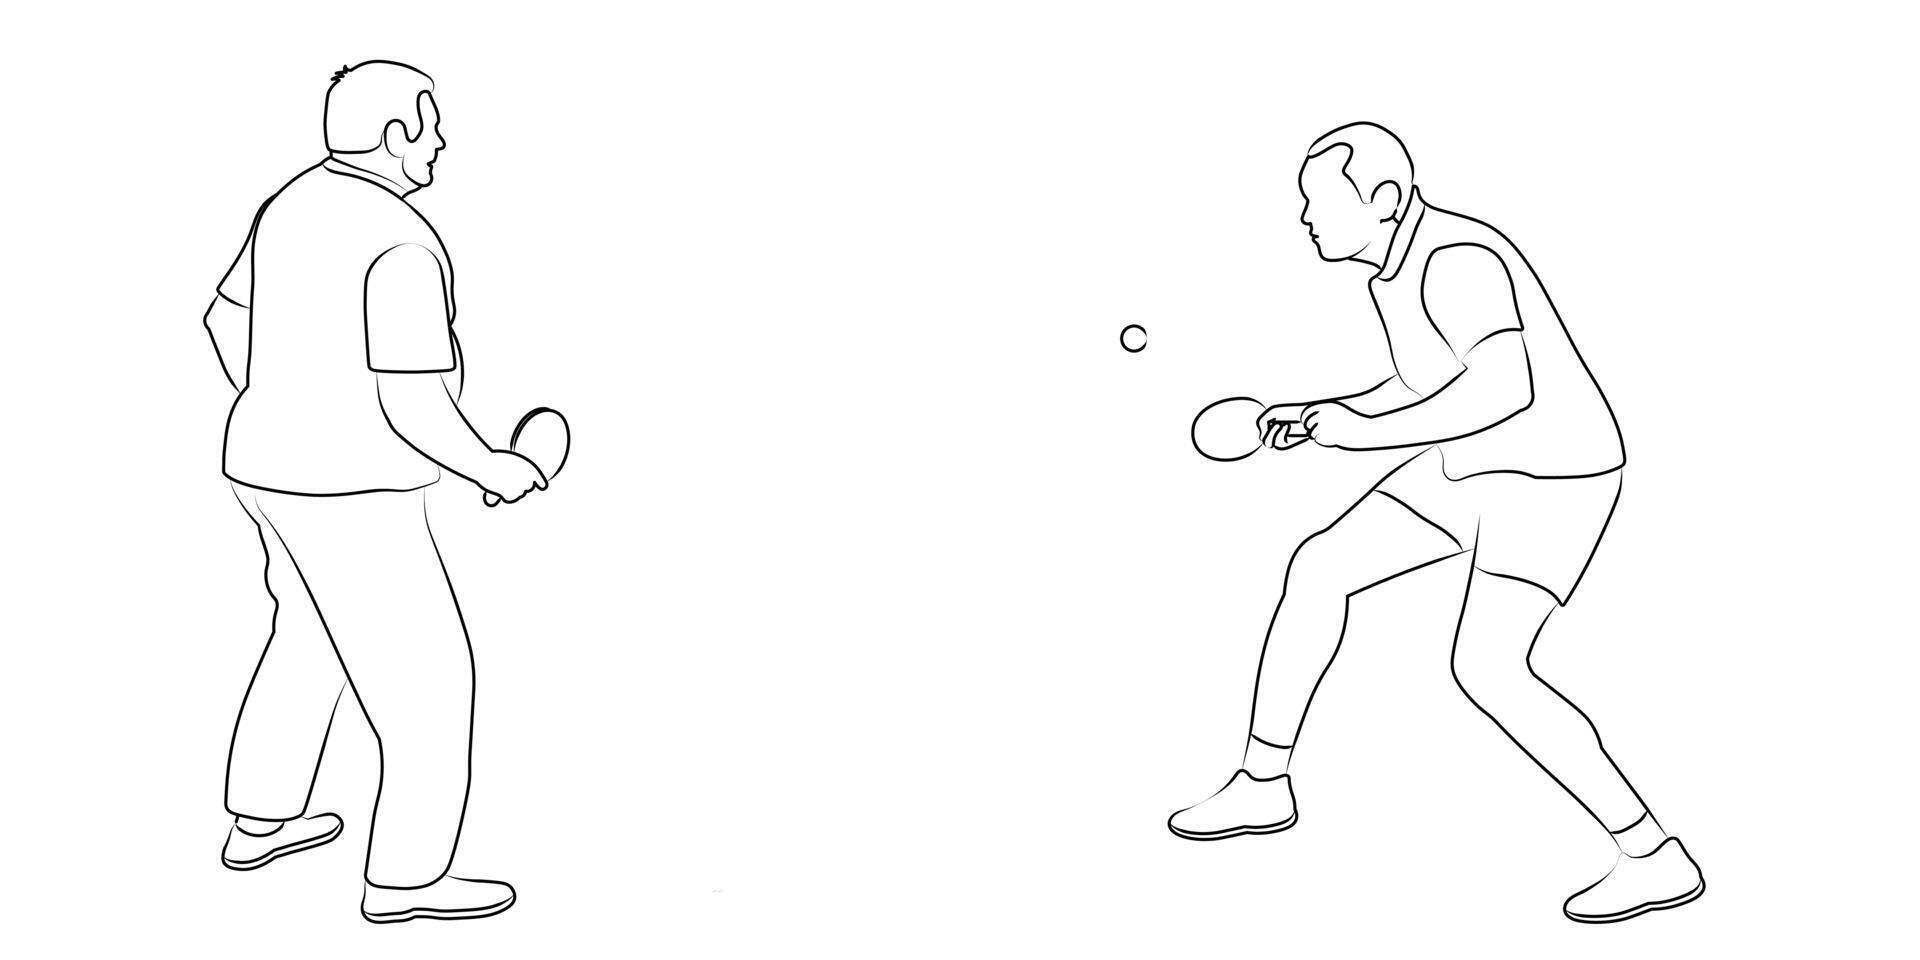 Single silhouettes of tennis players with racket and ball, line art, isolated vector